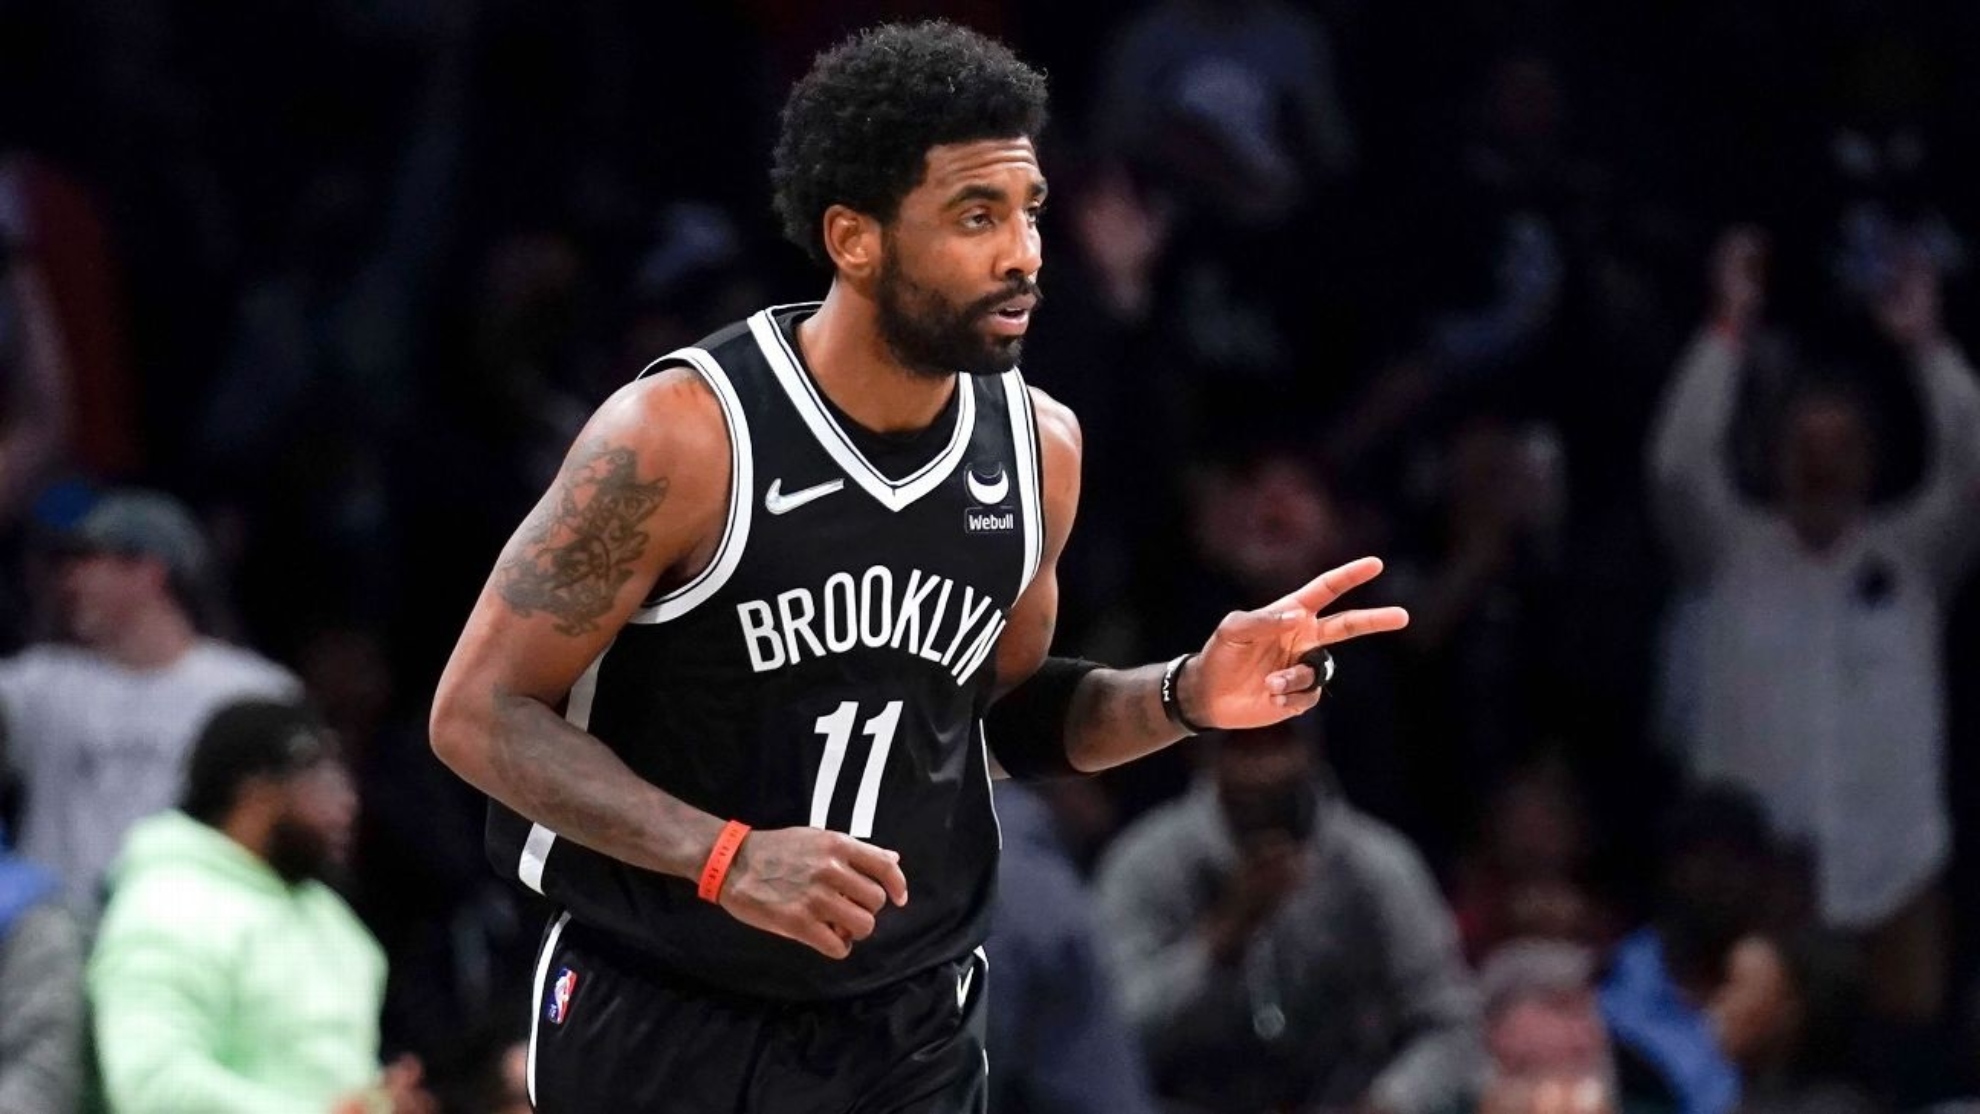 Report: Kyrie Irving hasn't requested Nets trade